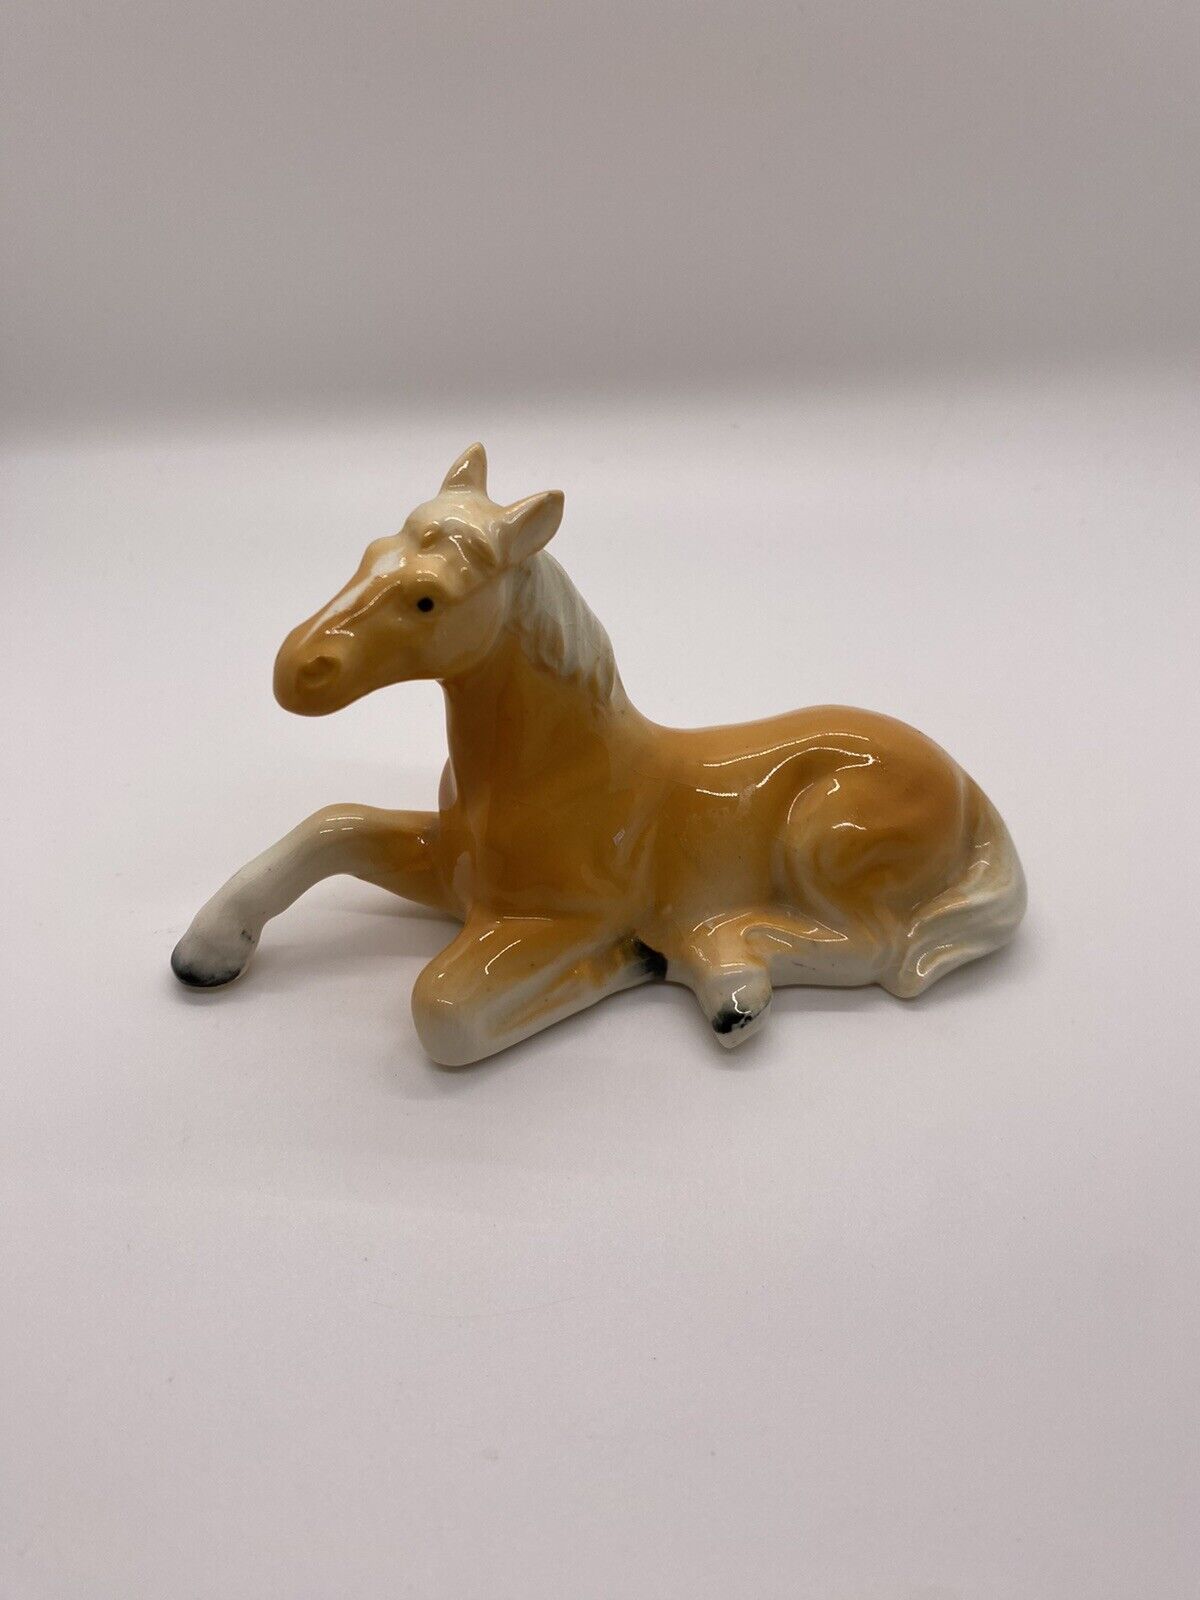 Vintage Porcelain Horse Figurine - Laying Down Position